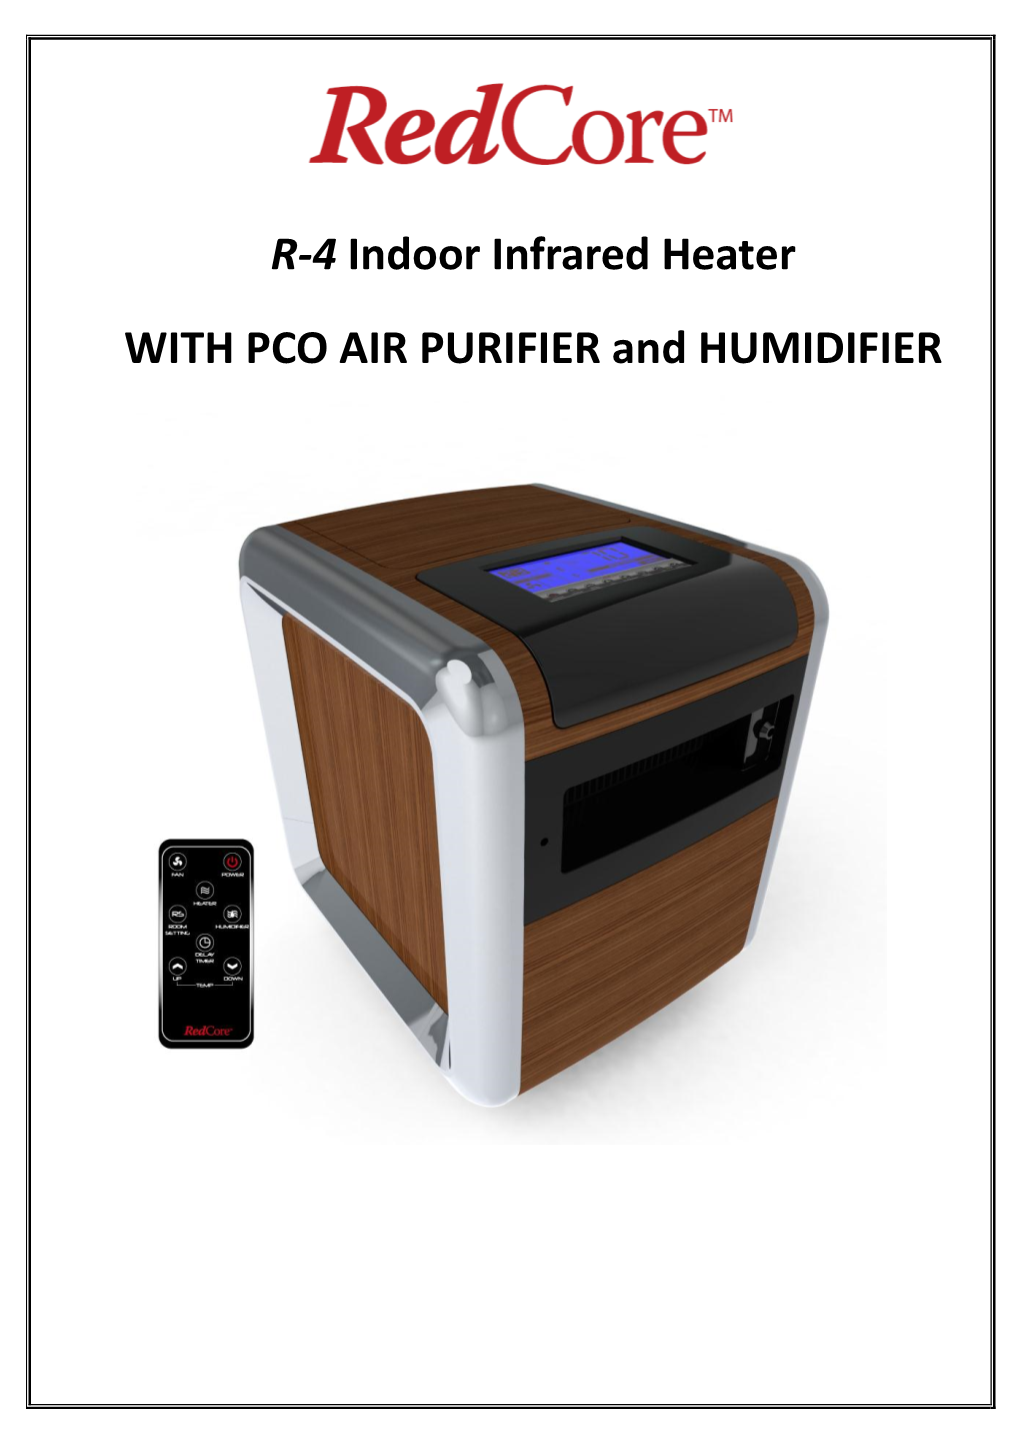 R-4 Indoor Infrared Heater with PCO AIR PURIFIER and HUMIDIFIER